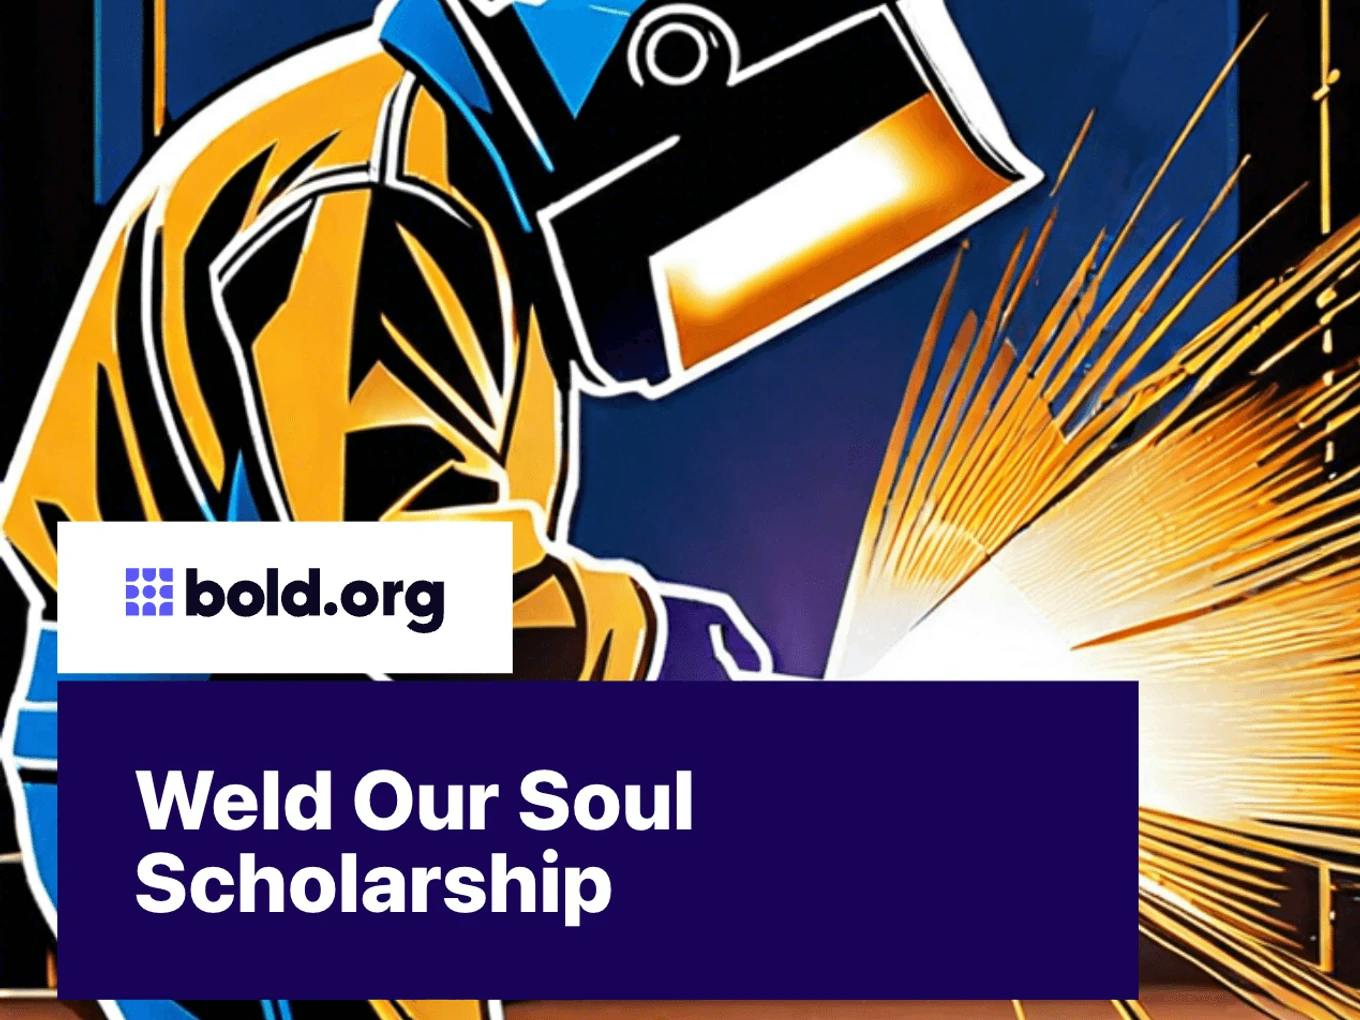 Weld Our Soul Scholarship